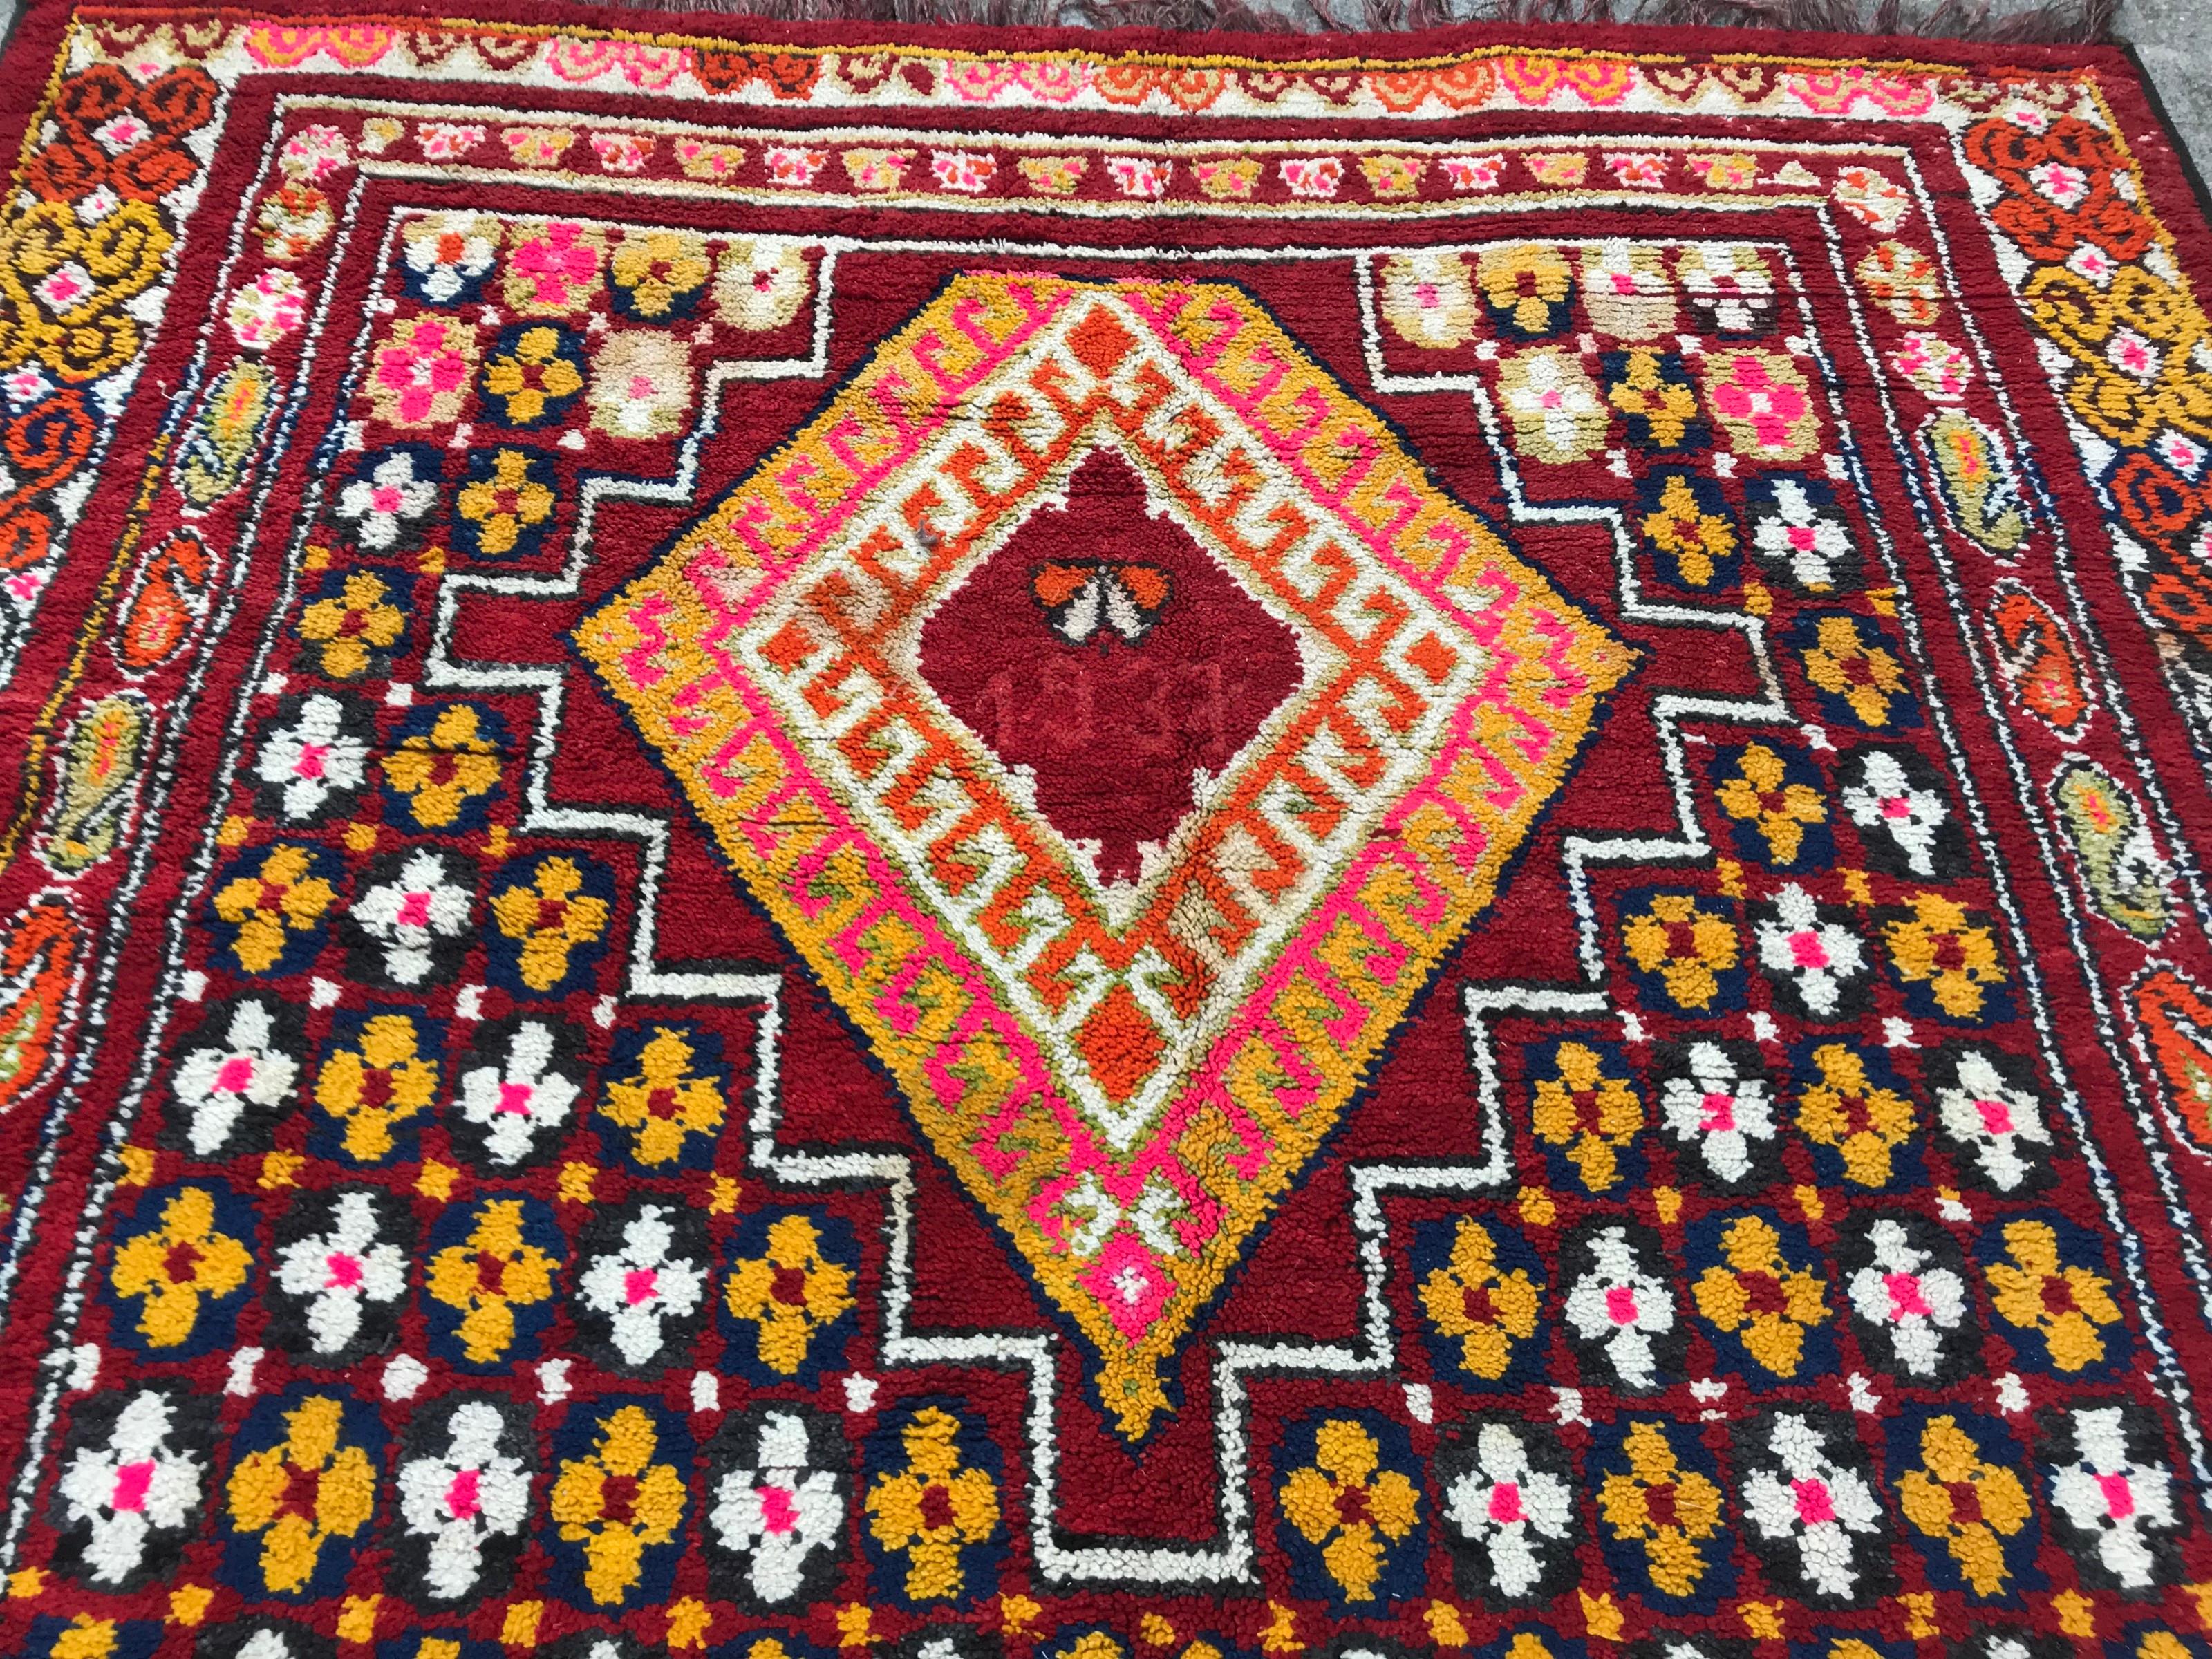 Bobyrug's Very Beautiful Moroccan Berbere Colorful Rug im Zustand „Gut“ im Angebot in Saint Ouen, FR